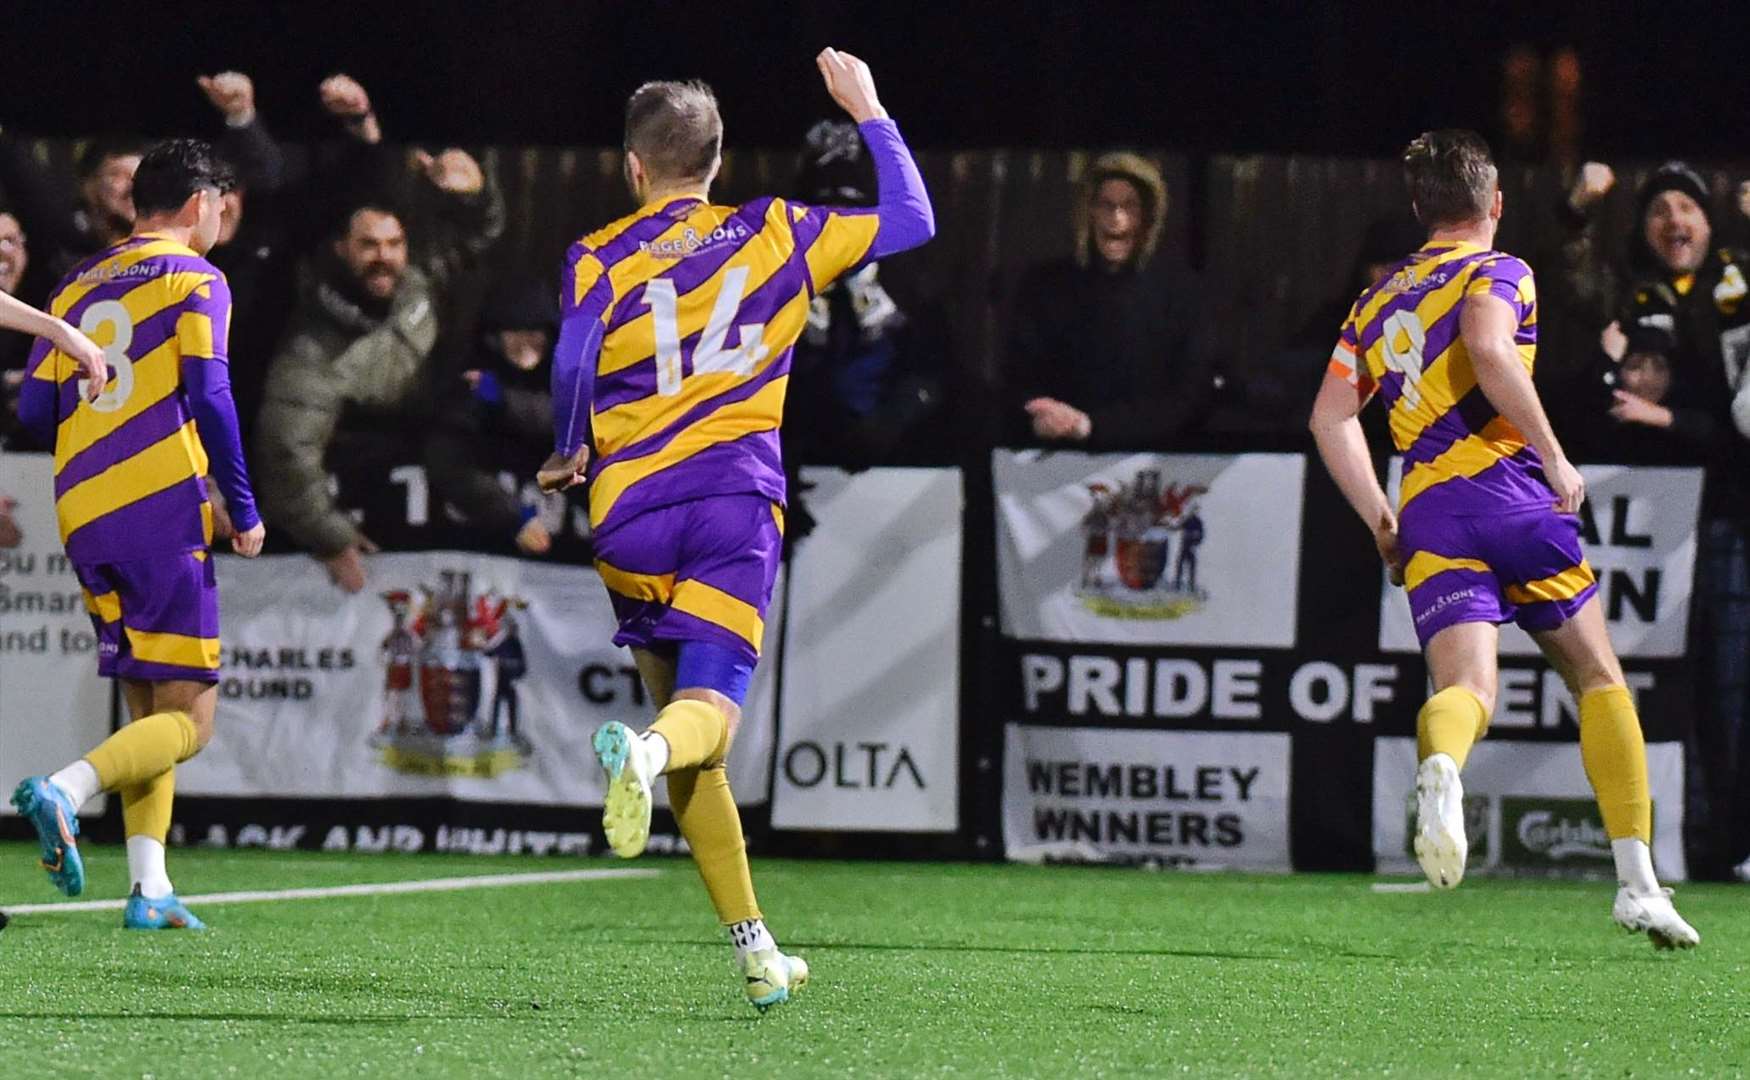 Aaron Millbank leads the Deal celebrations after one of his goals in their 4-2 weekend win at Faversham. Picture: Ian Scammell